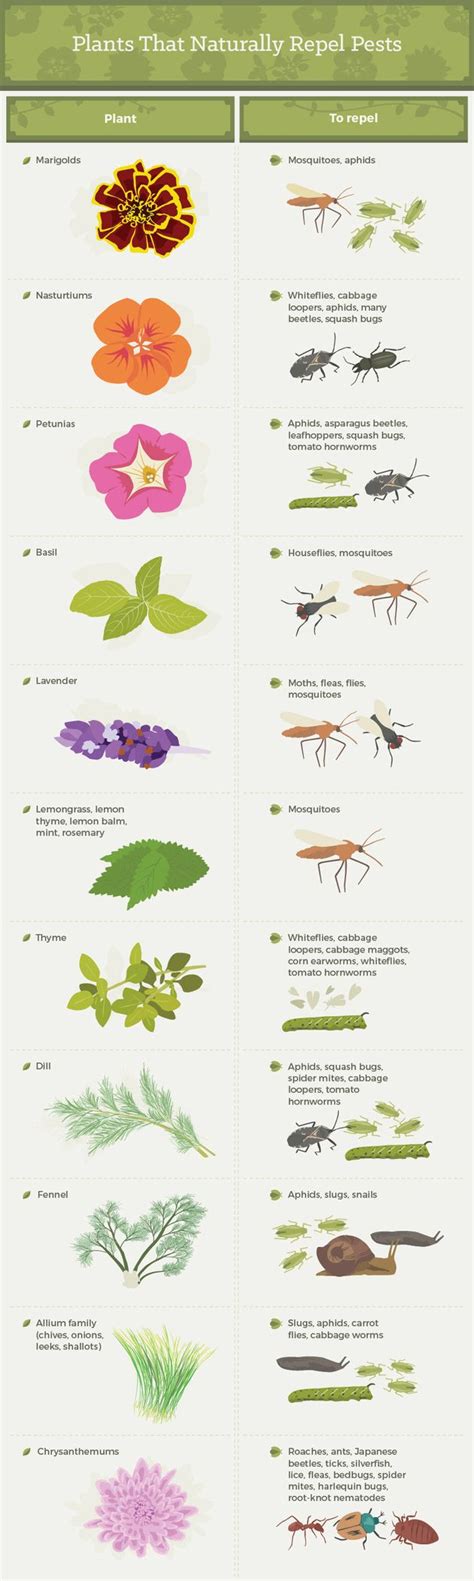 Everything You Need To Know About Getting Rid Of Common Garden Pests